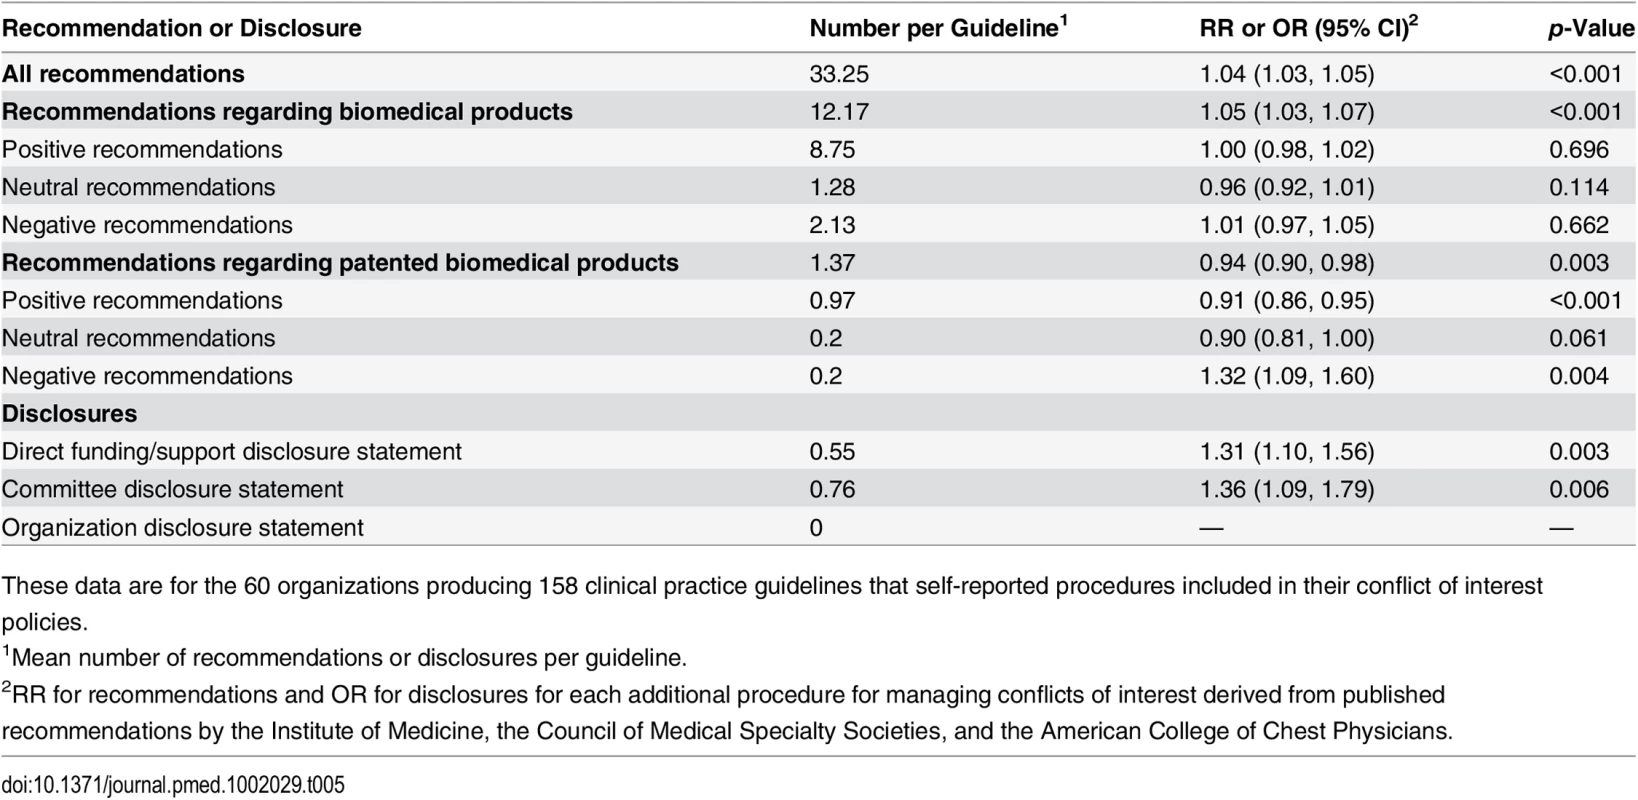 Clinical practice guideline recommendations and disclosures according to the number of procedures in an organization’s conflict of interest policy.